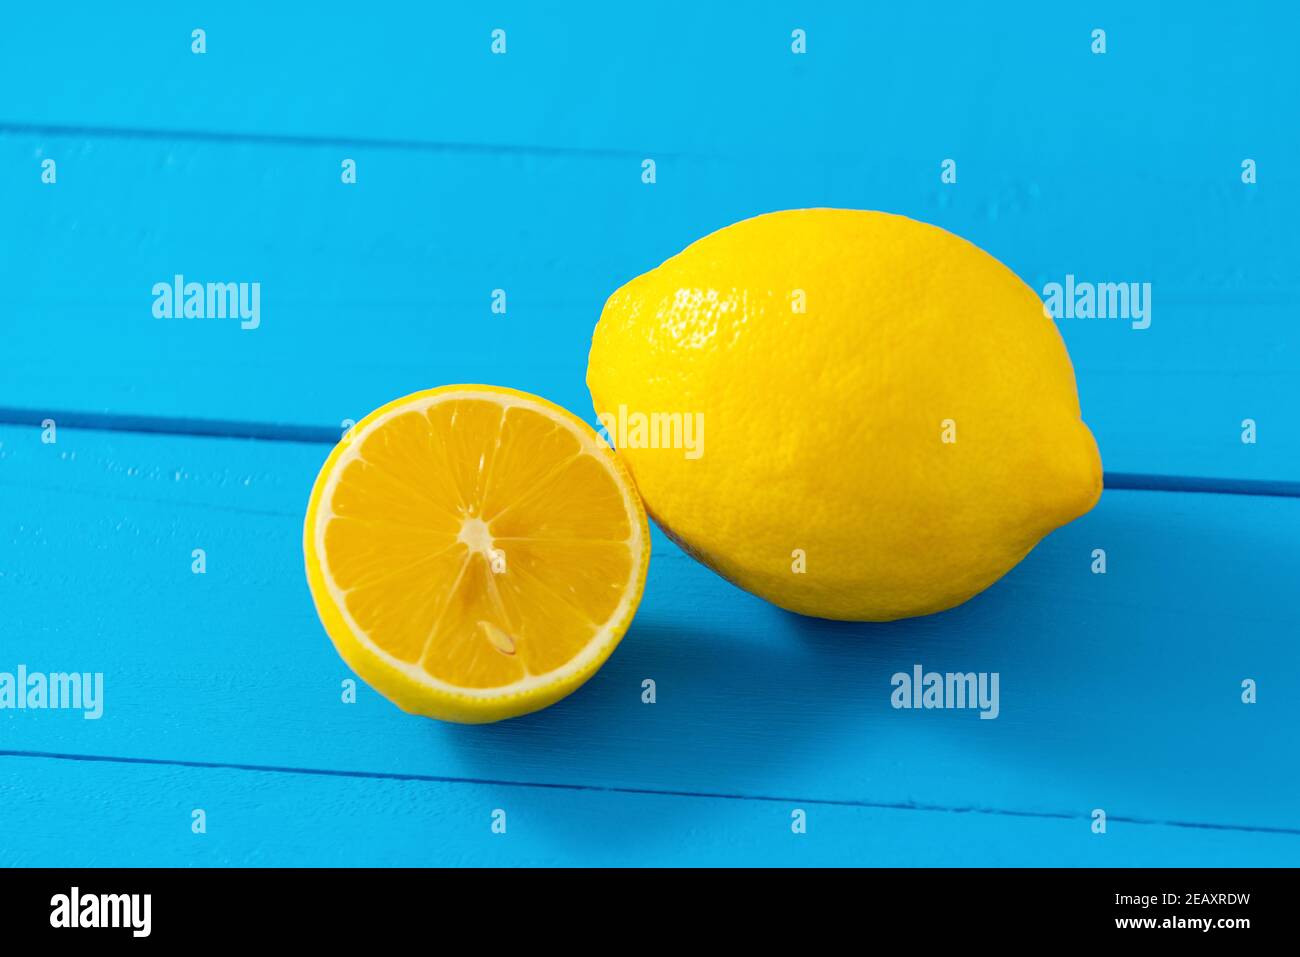 One whole and one half cut fresh lemon on blue table background Stock Photo